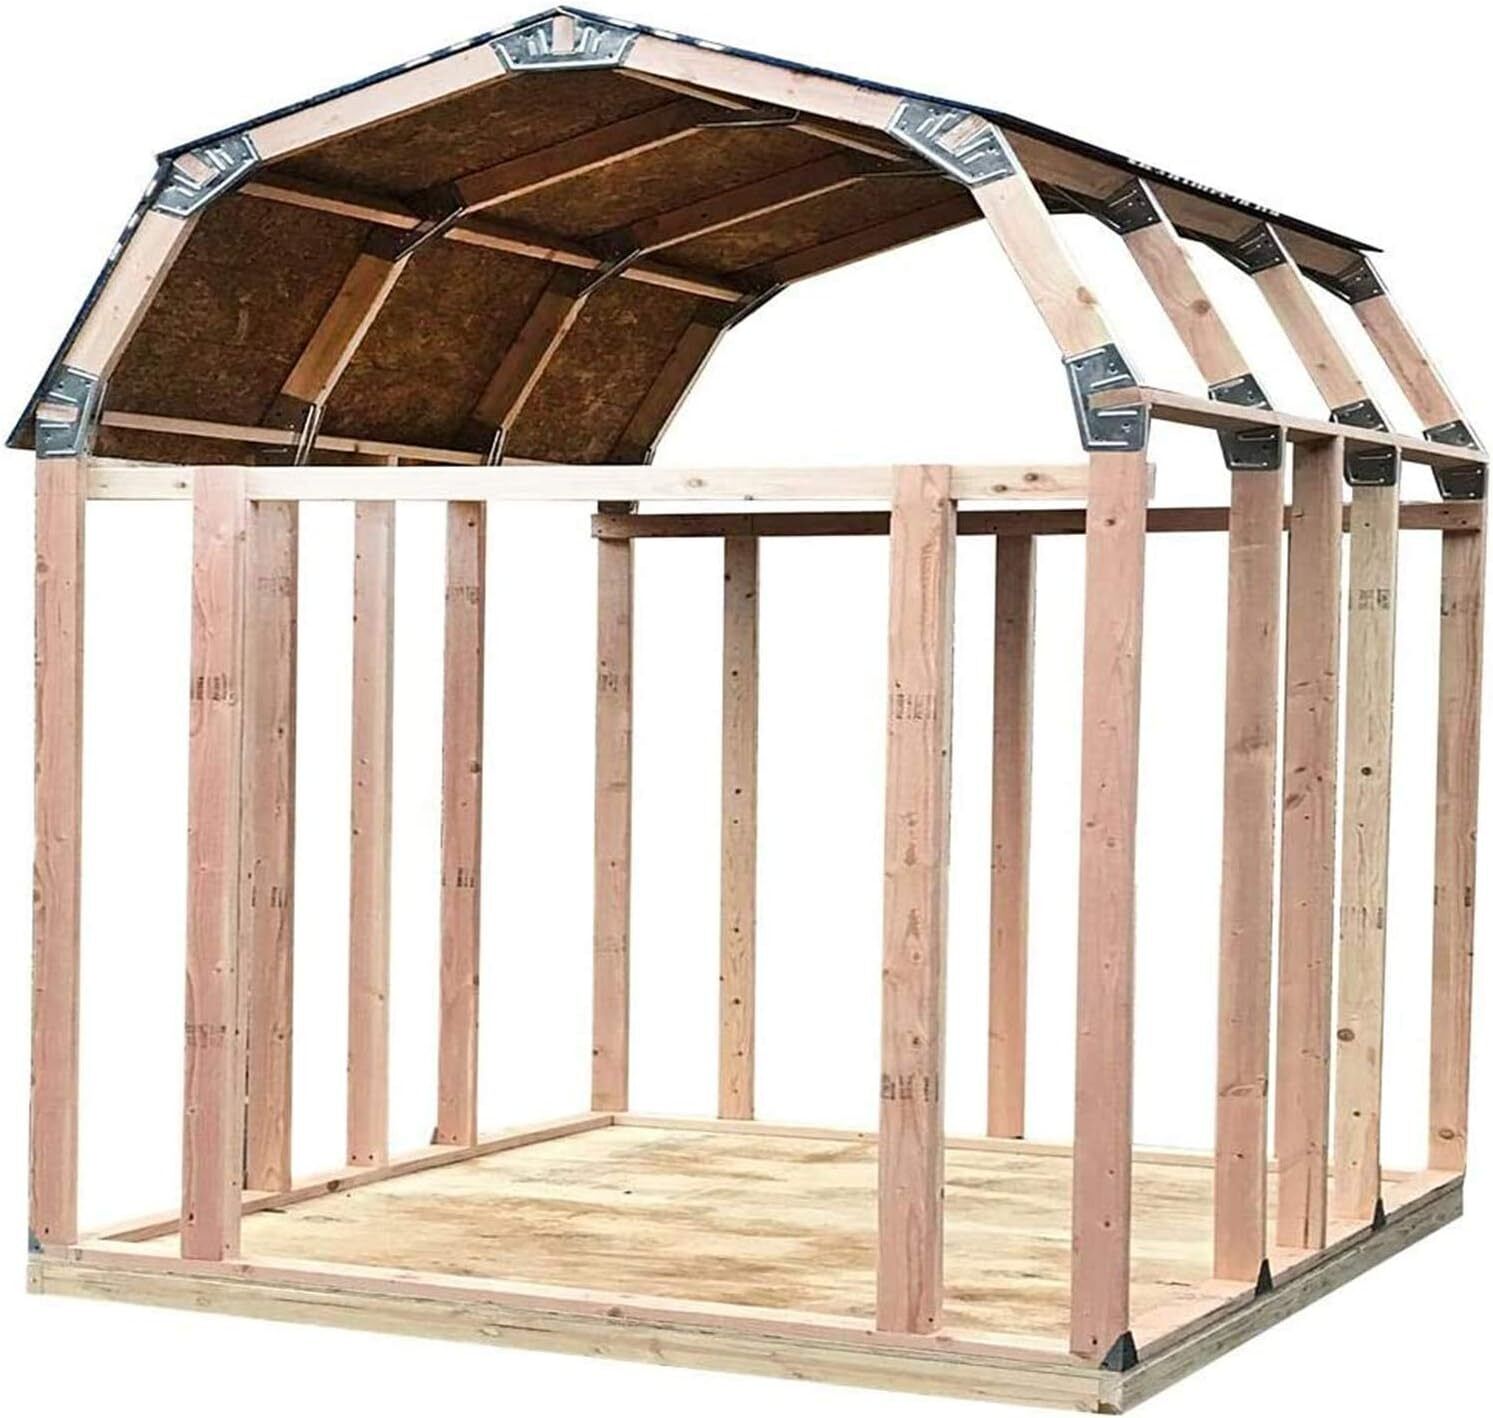 NEW Instant Framer Kit Barn Style Shed Kit (FREE SHIPPING)